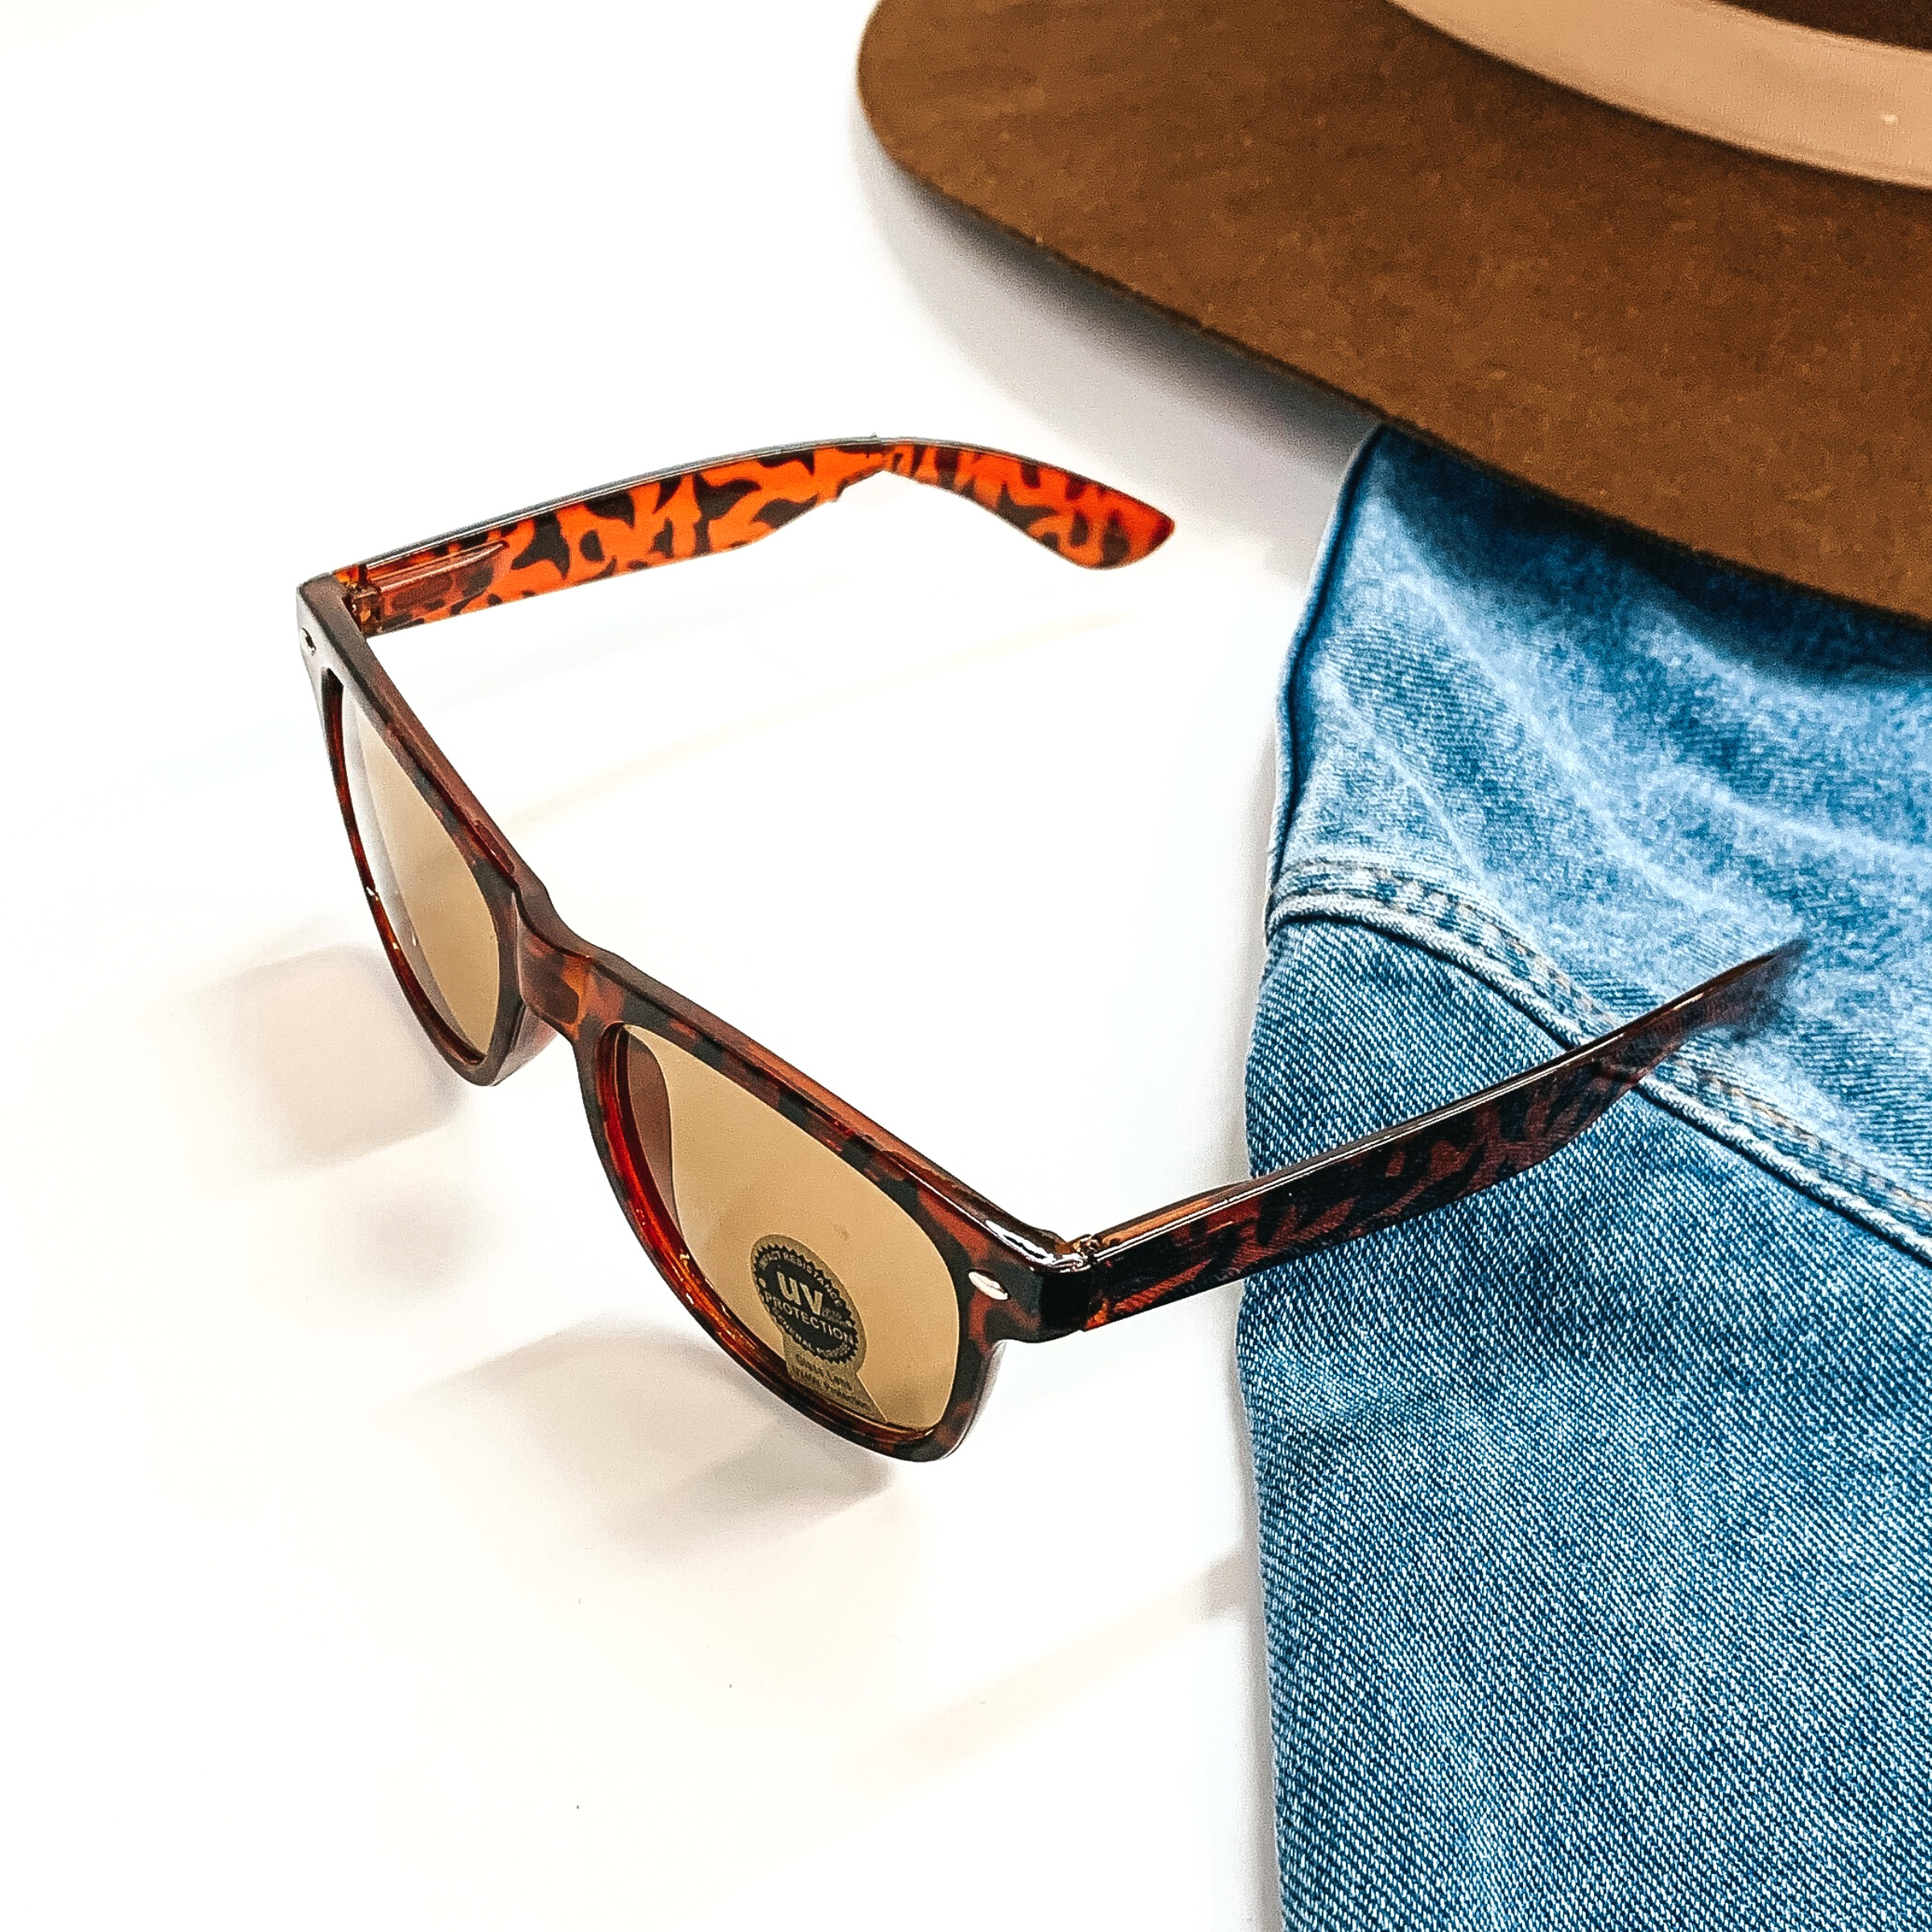 This pair of sunglasses has a brown tortouise print frame with brown  lenses and silver detailing  in the side. This pair of sunglasses are taken on a white background and jean jacket  sleeve with a brown felt hat as decor.